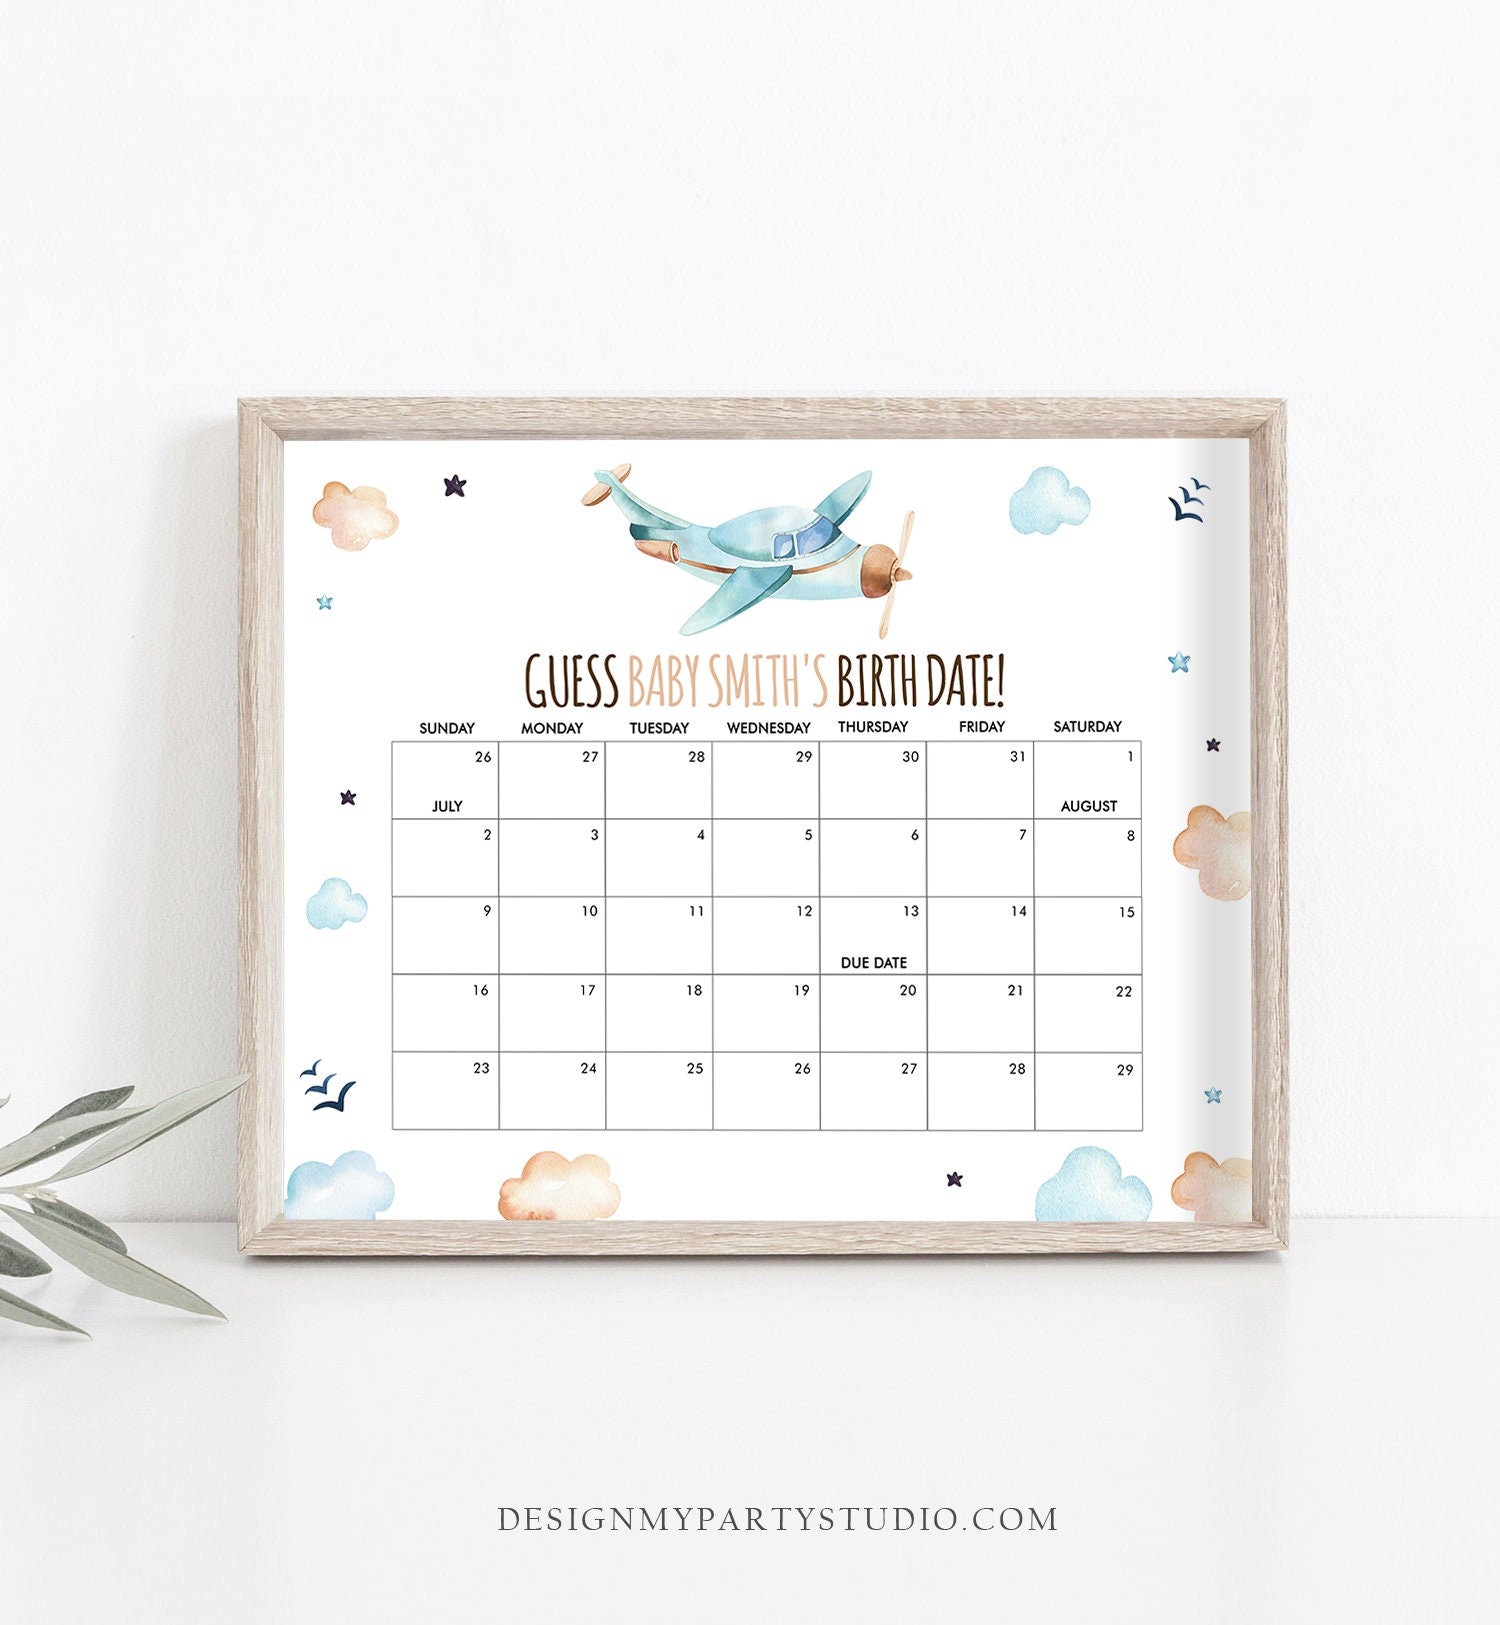 Editable Guess the Birth Date Baby Shower Game Guess Birthday Vintage Airplane Blue Travel Adventure Shower Corjl Template Printable 0185